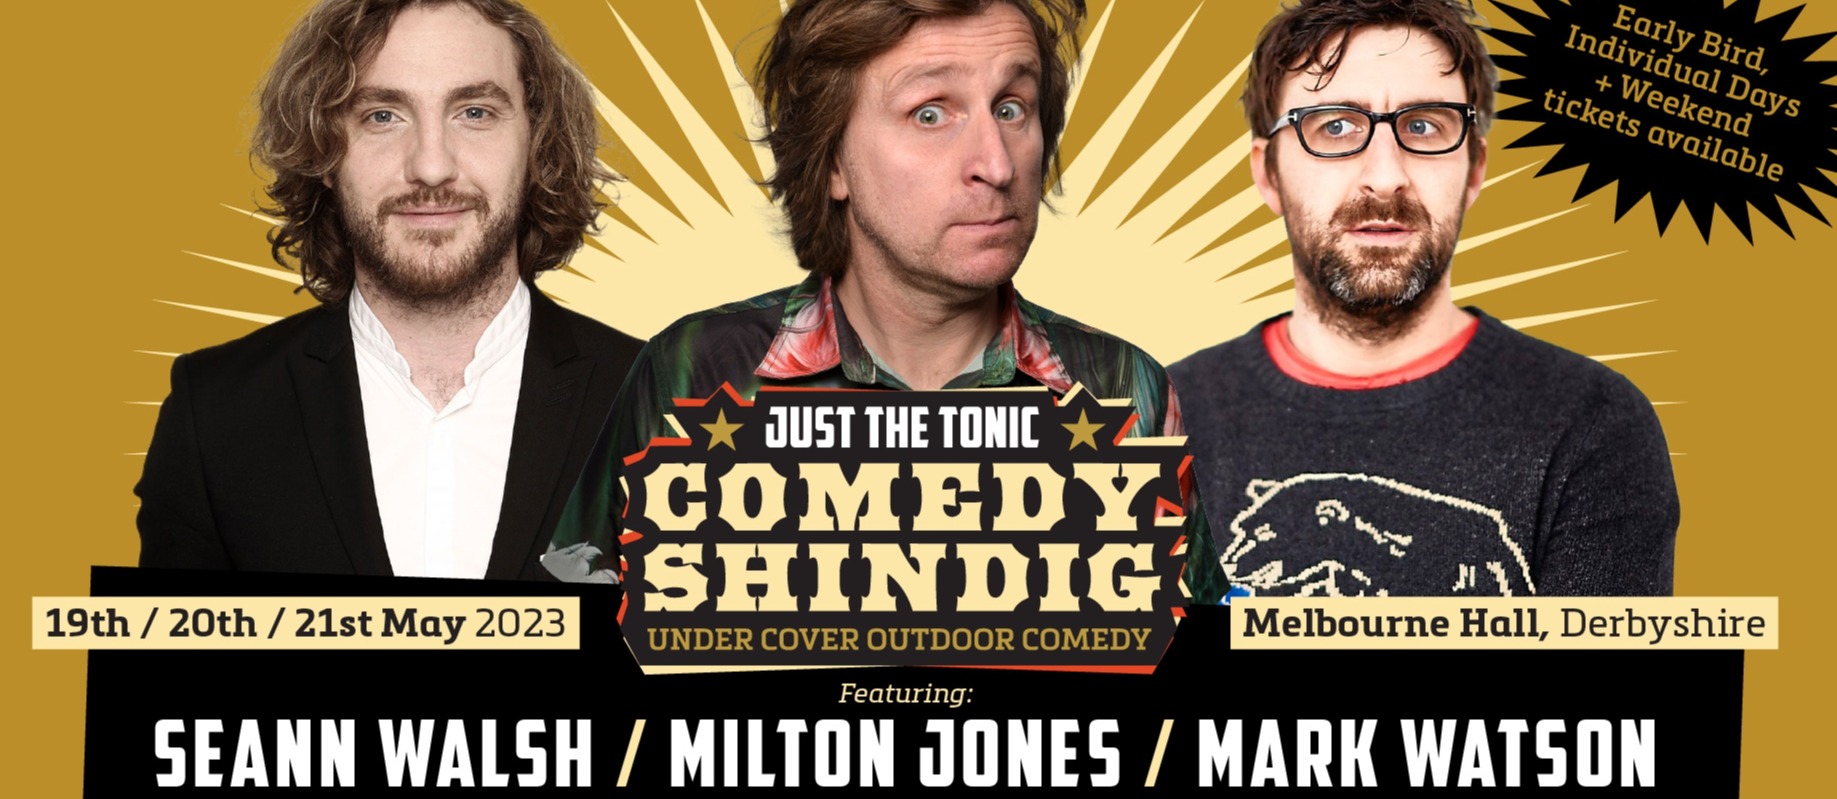 Just the Tonic Comedy Shindig - Melbourne Hall - Weekend Ticket 